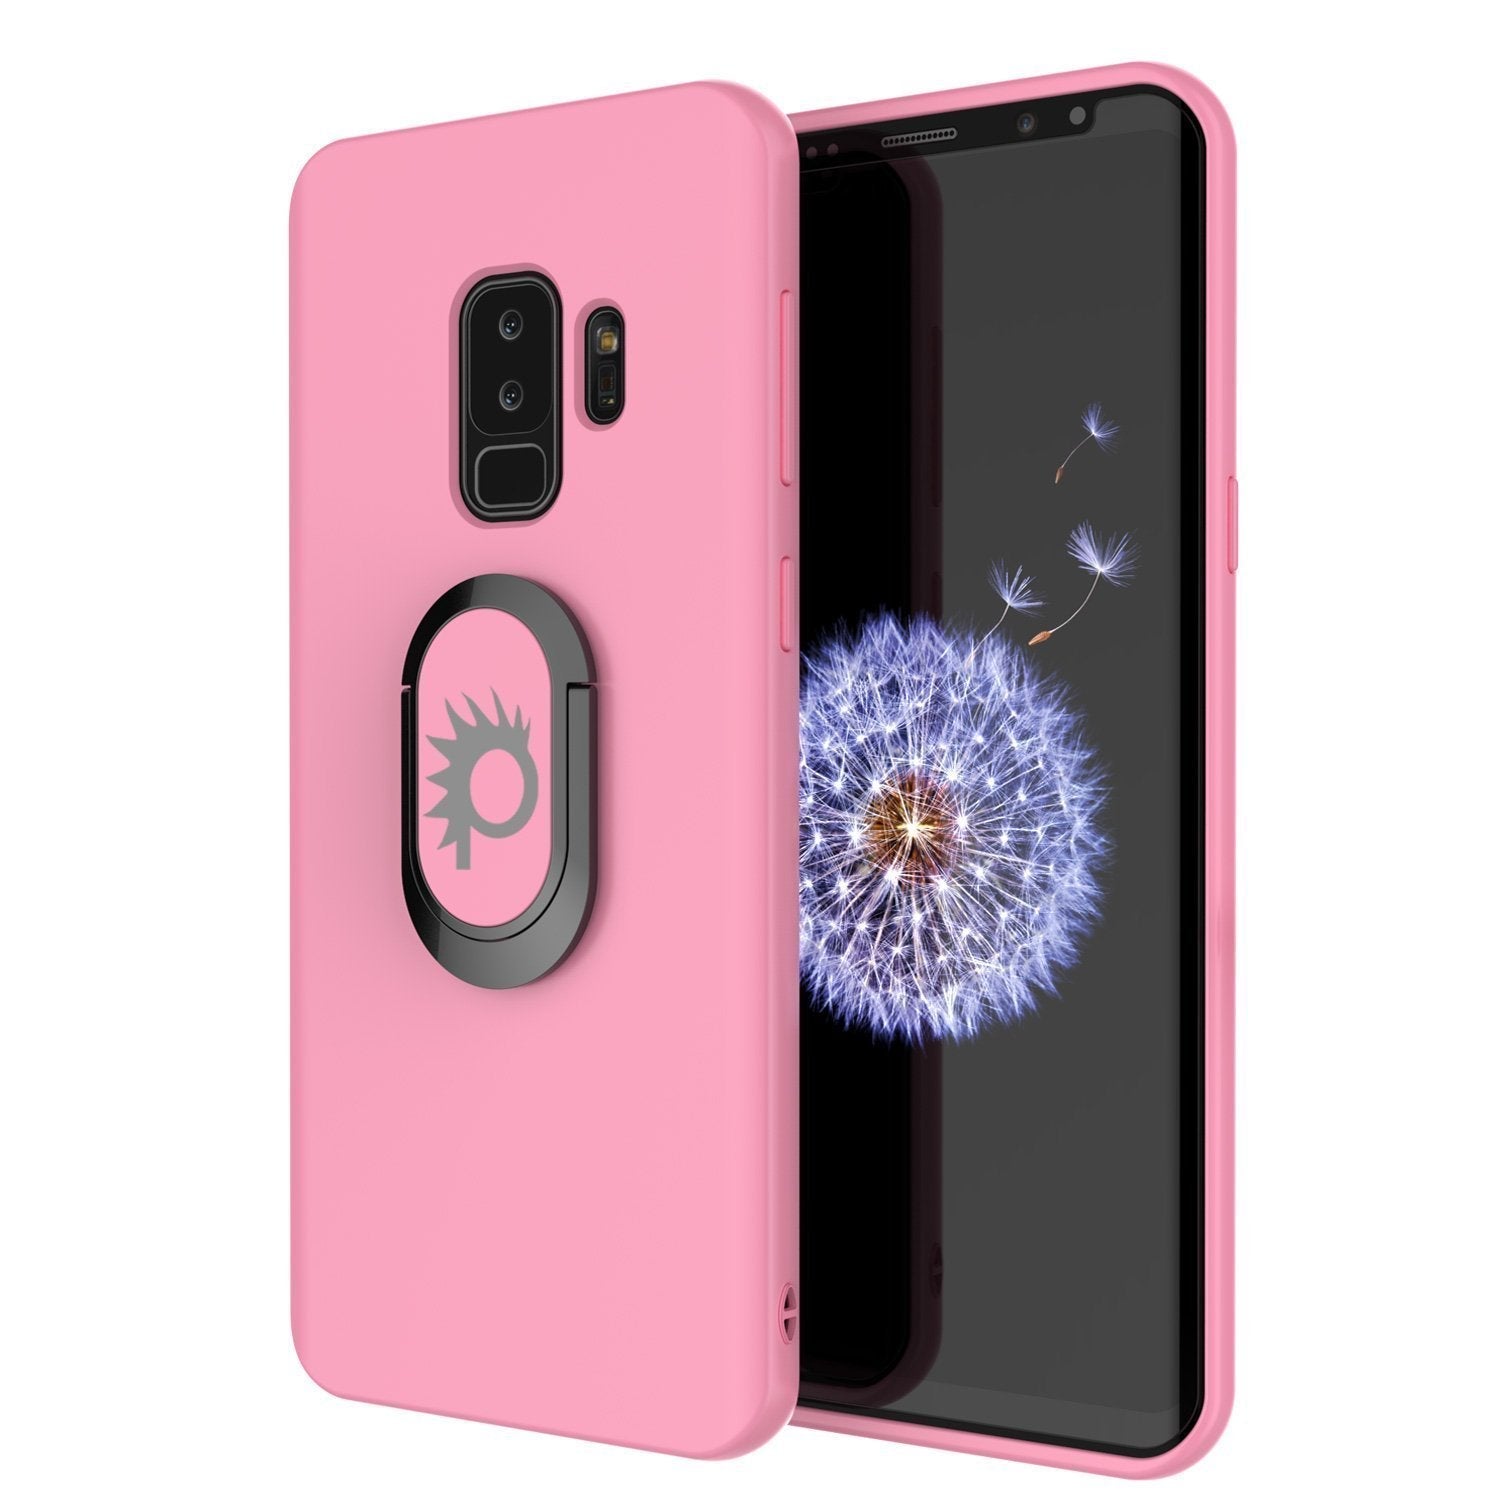 Galaxy S10+ Plus, Punkcase Magnetix Protective TPU Cover W/ Kickstand, Sceen Protector[Pink] (Color in image: pink)